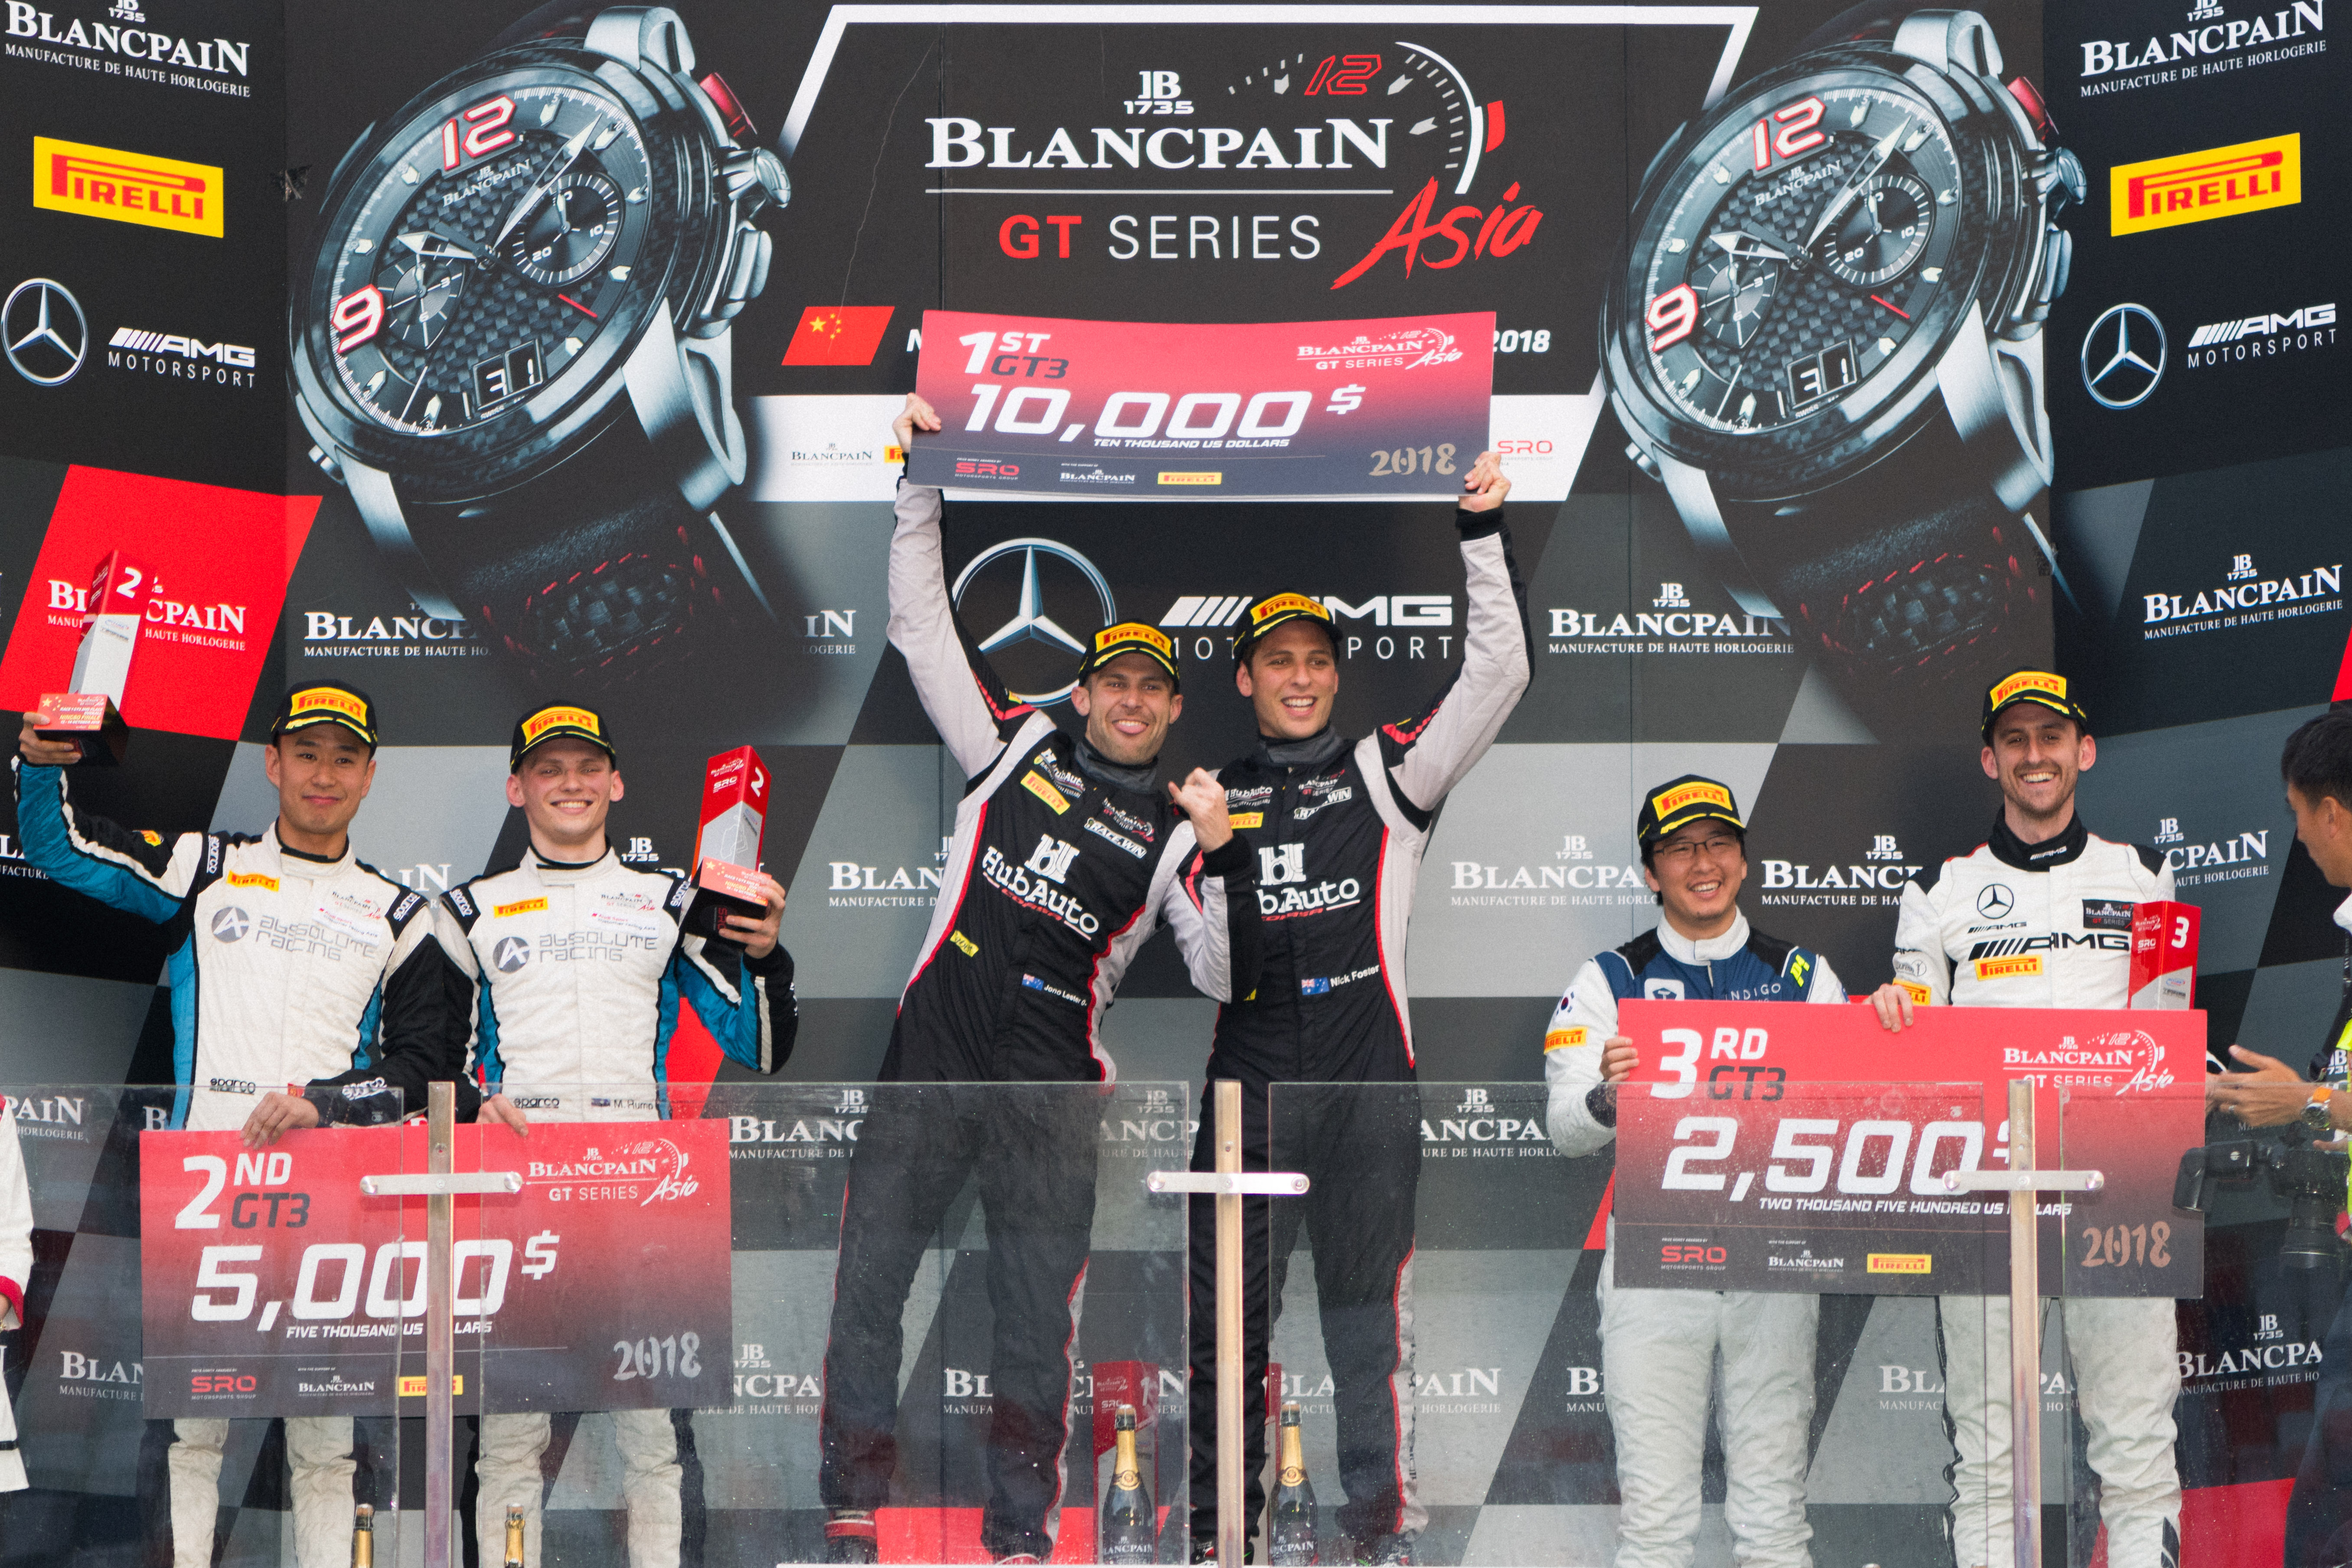 Lester, Foster and HubAuto Finish Blancpain GT Asia Season With Victory At Ningbo